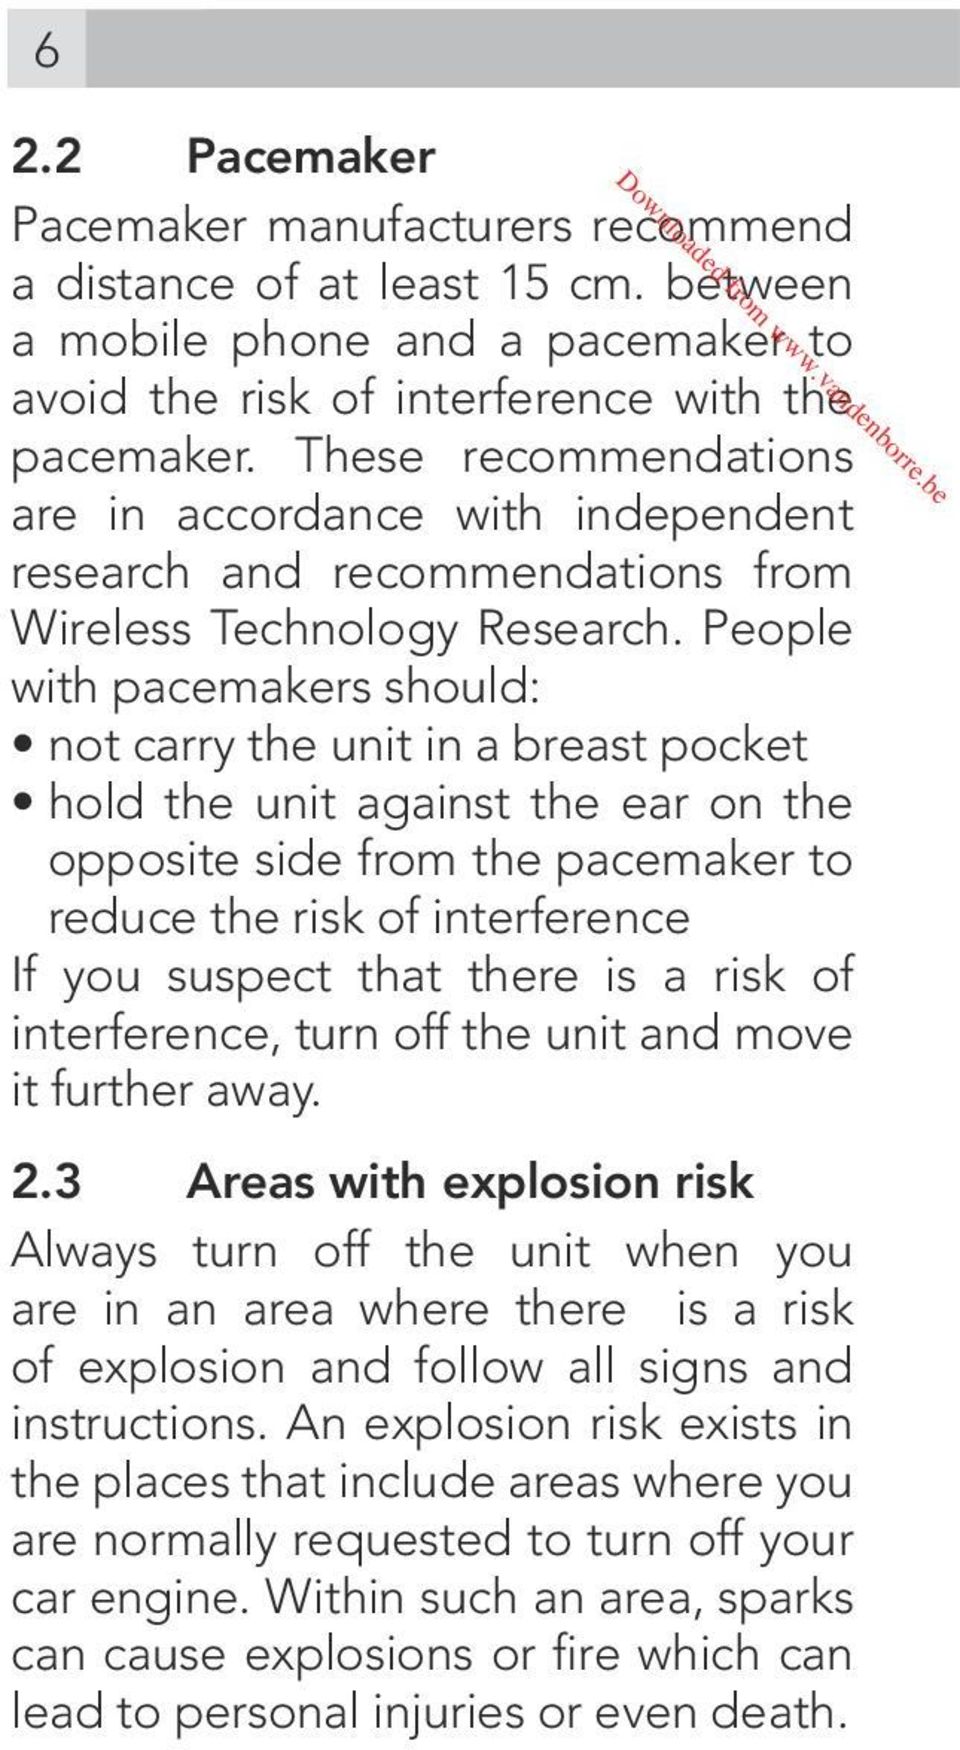 People with pacemakers should: not carry the unit in a breast pocket hold the unit against the ear on the opposite side from the pacemaker to reduce the risk of interference If you suspect that there